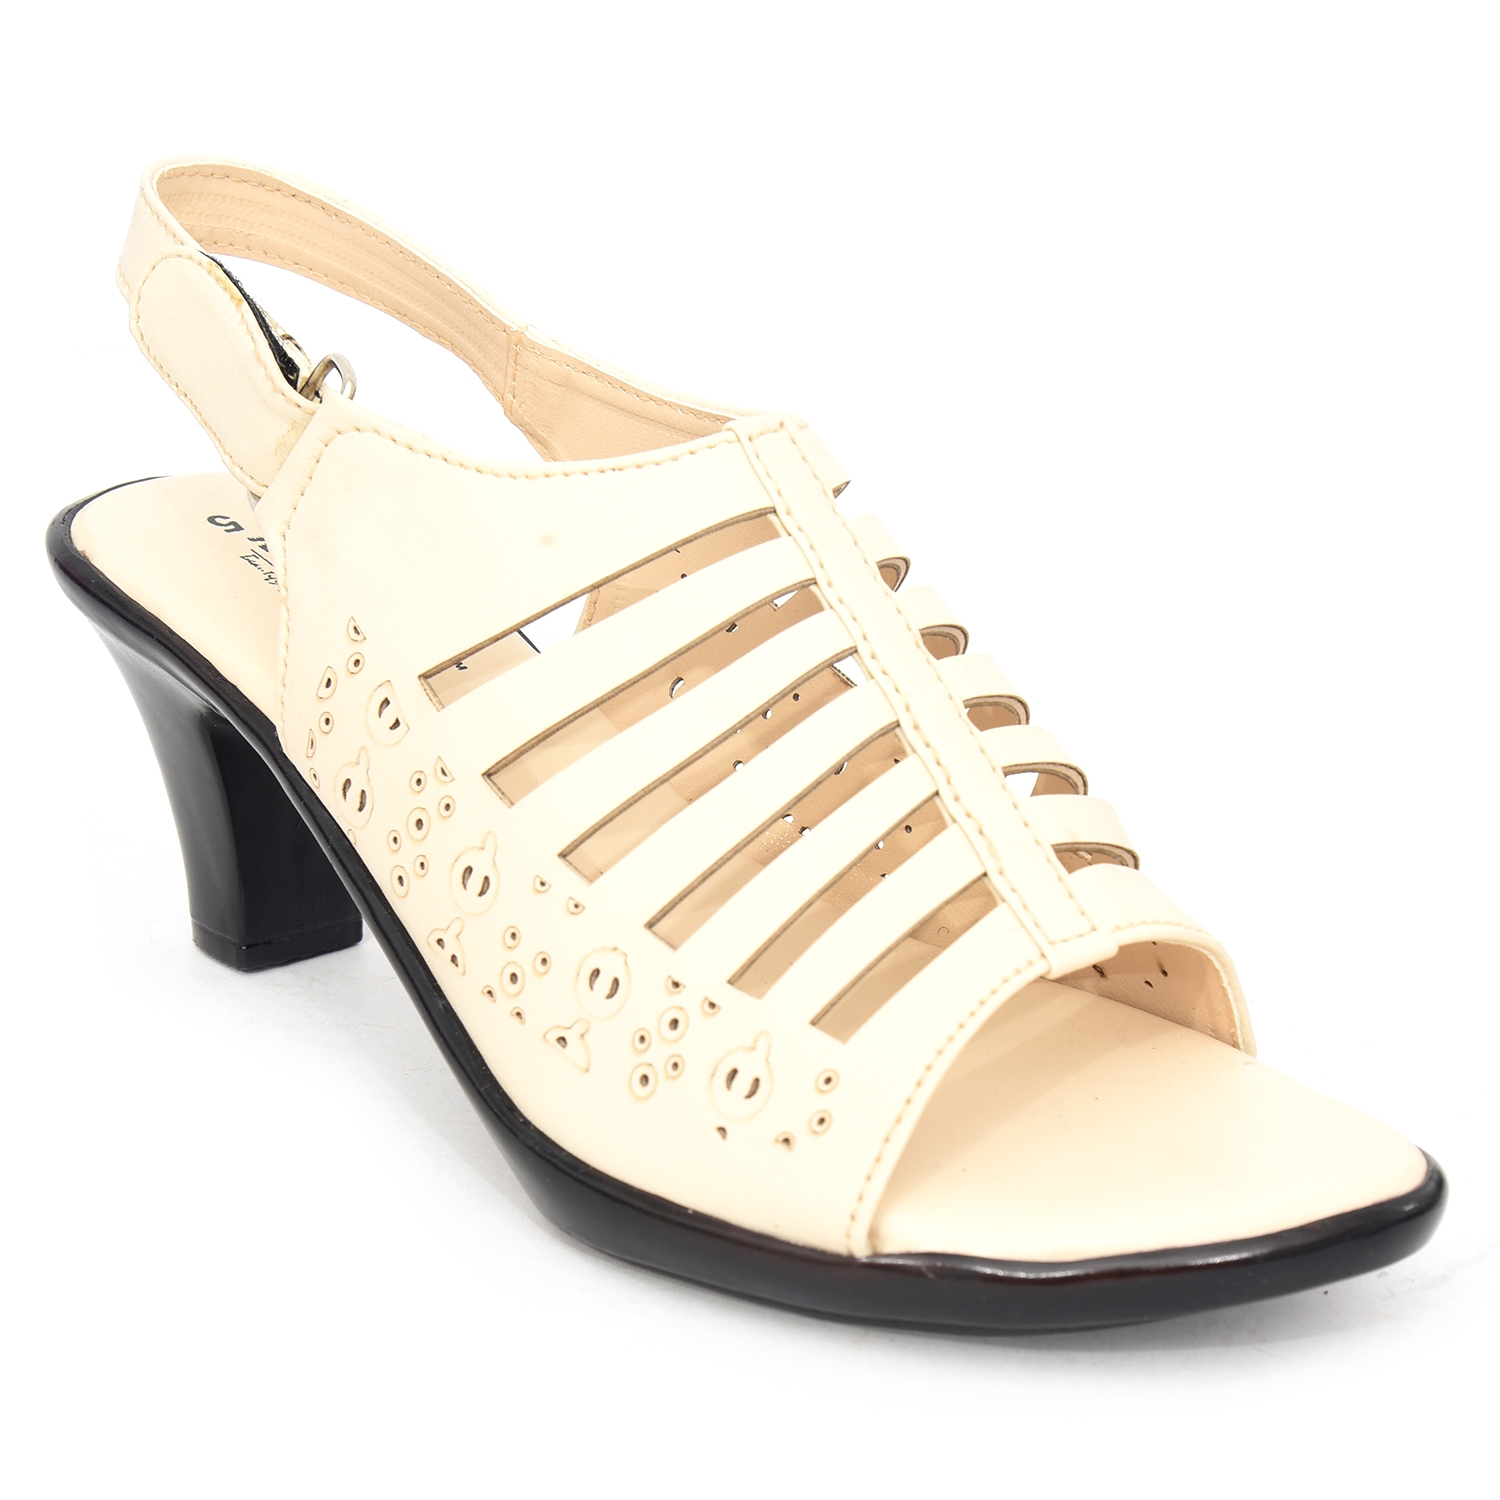 Racecourse | Racecourse Women's Total Sole Artificial Leather Laser Cut Back Belt Sandal With The Heel Height of 3 Inch 833 Cream